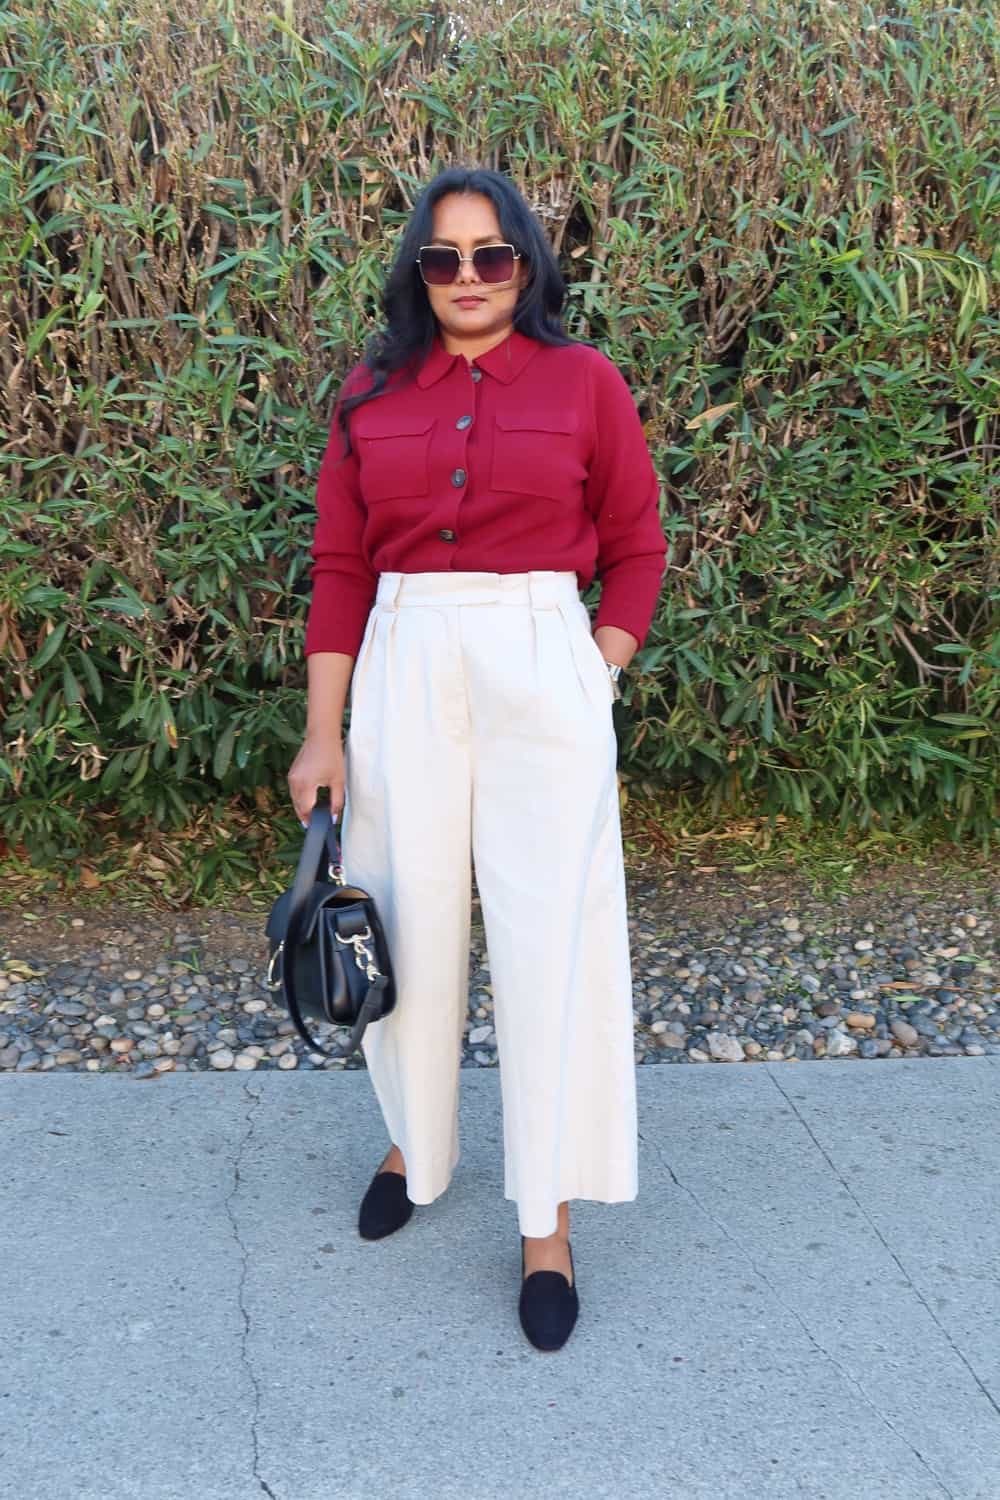 Casual Thanksgiving Outfit Idea - Cardigan with wide leg pants